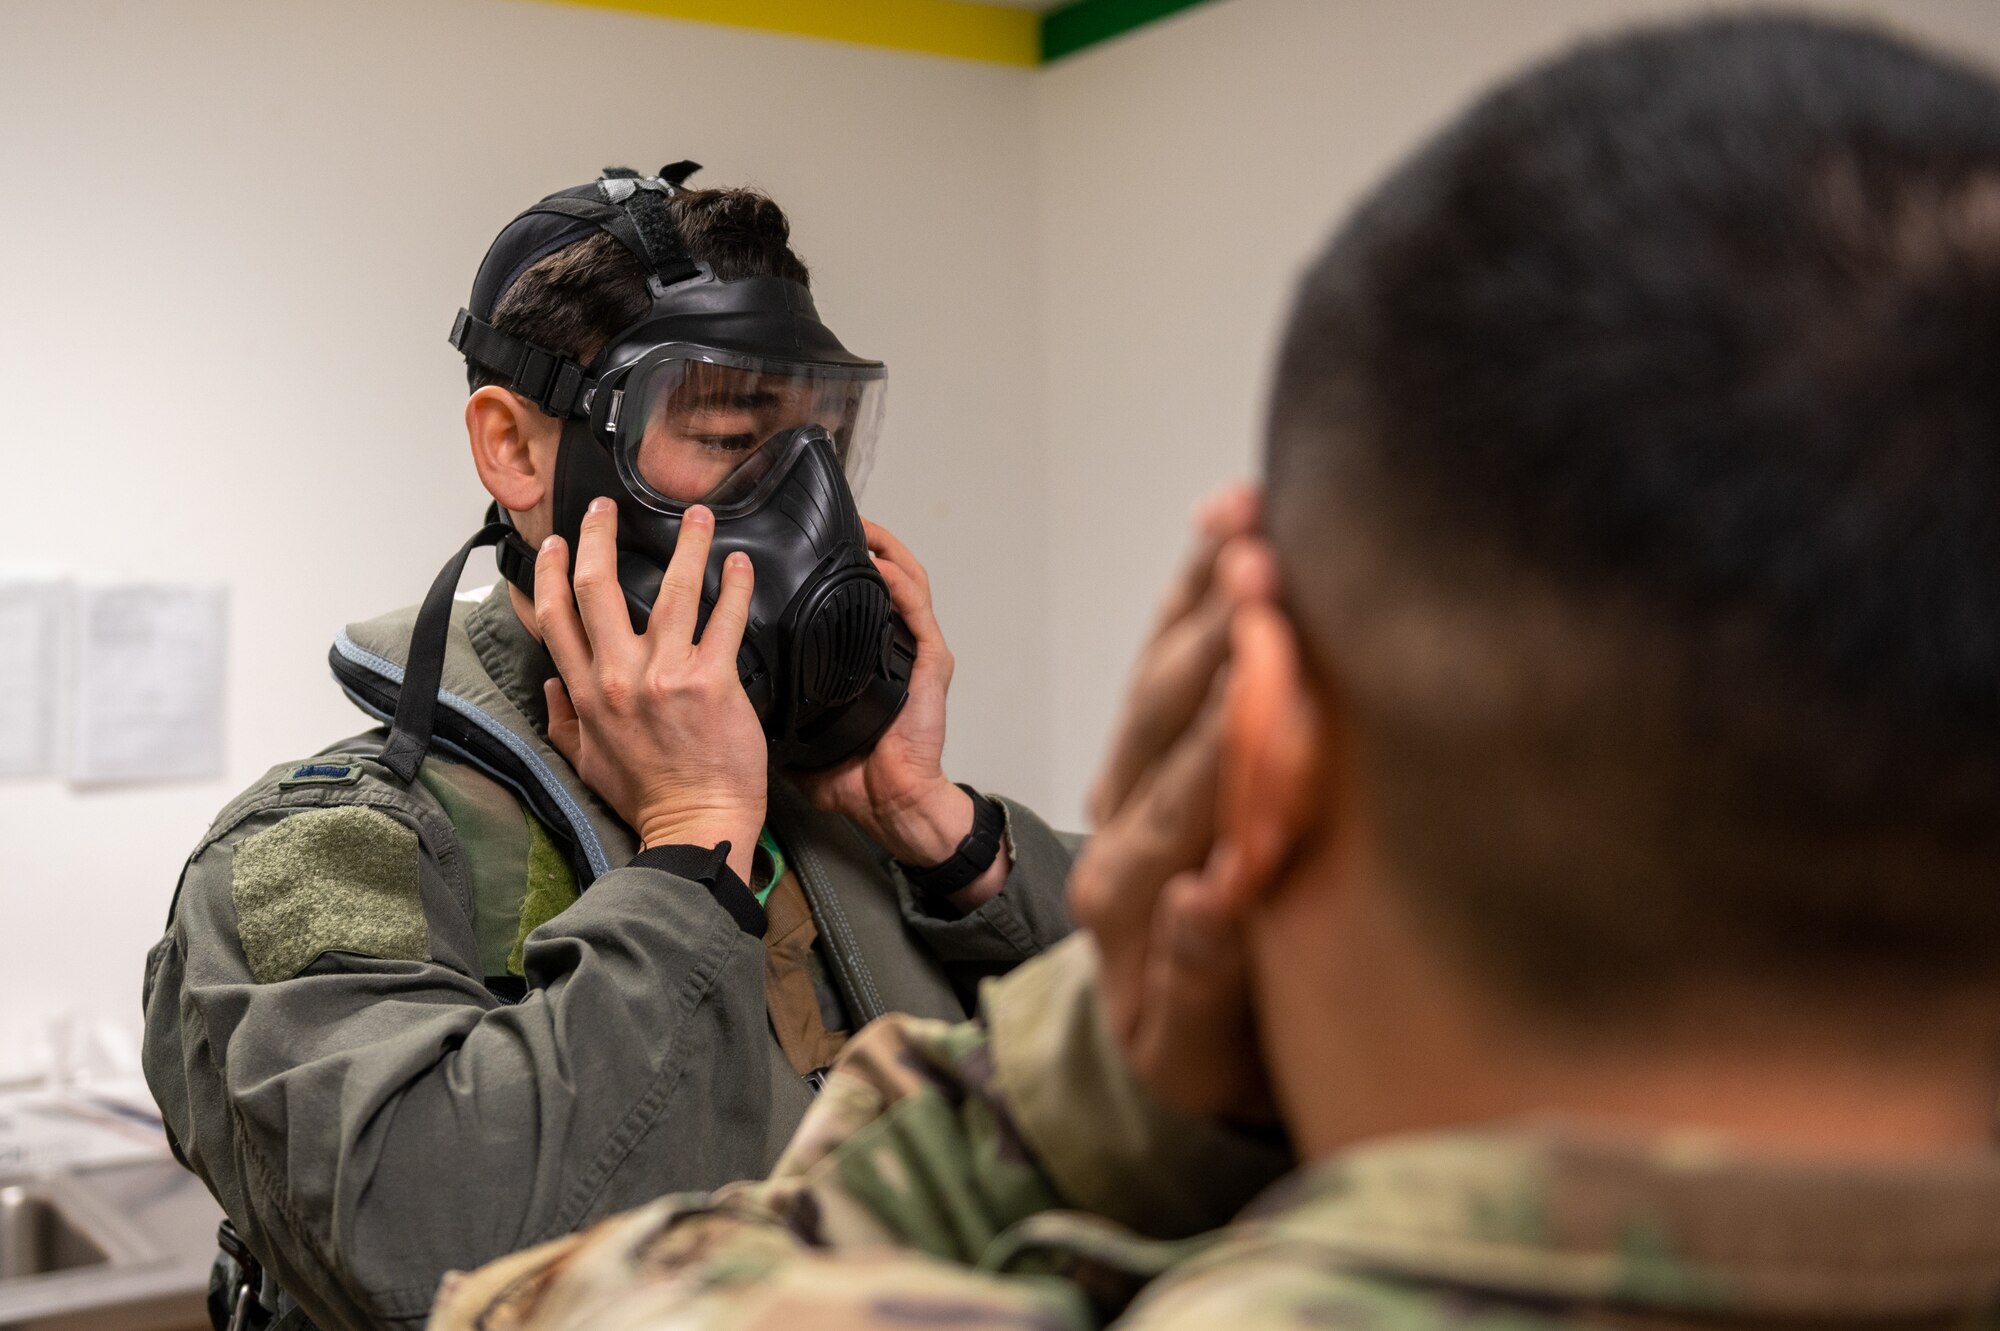 U.S. Air Force Senior Airman Isiah Echevarria, 51st Operations Support Squadron aircrew flight equipment journeyman, ensures U.S. Air Force 1st Lt. Michael Davey, 25th Fighter Squadron A-10C Thunderbolt II pilot, has a tight seal for his M50 respirator mask while participating in a next generation aircrew protection (NGAP) evaluation at Osan Air Base, Republic of Korea, Jan. 18, 2023.